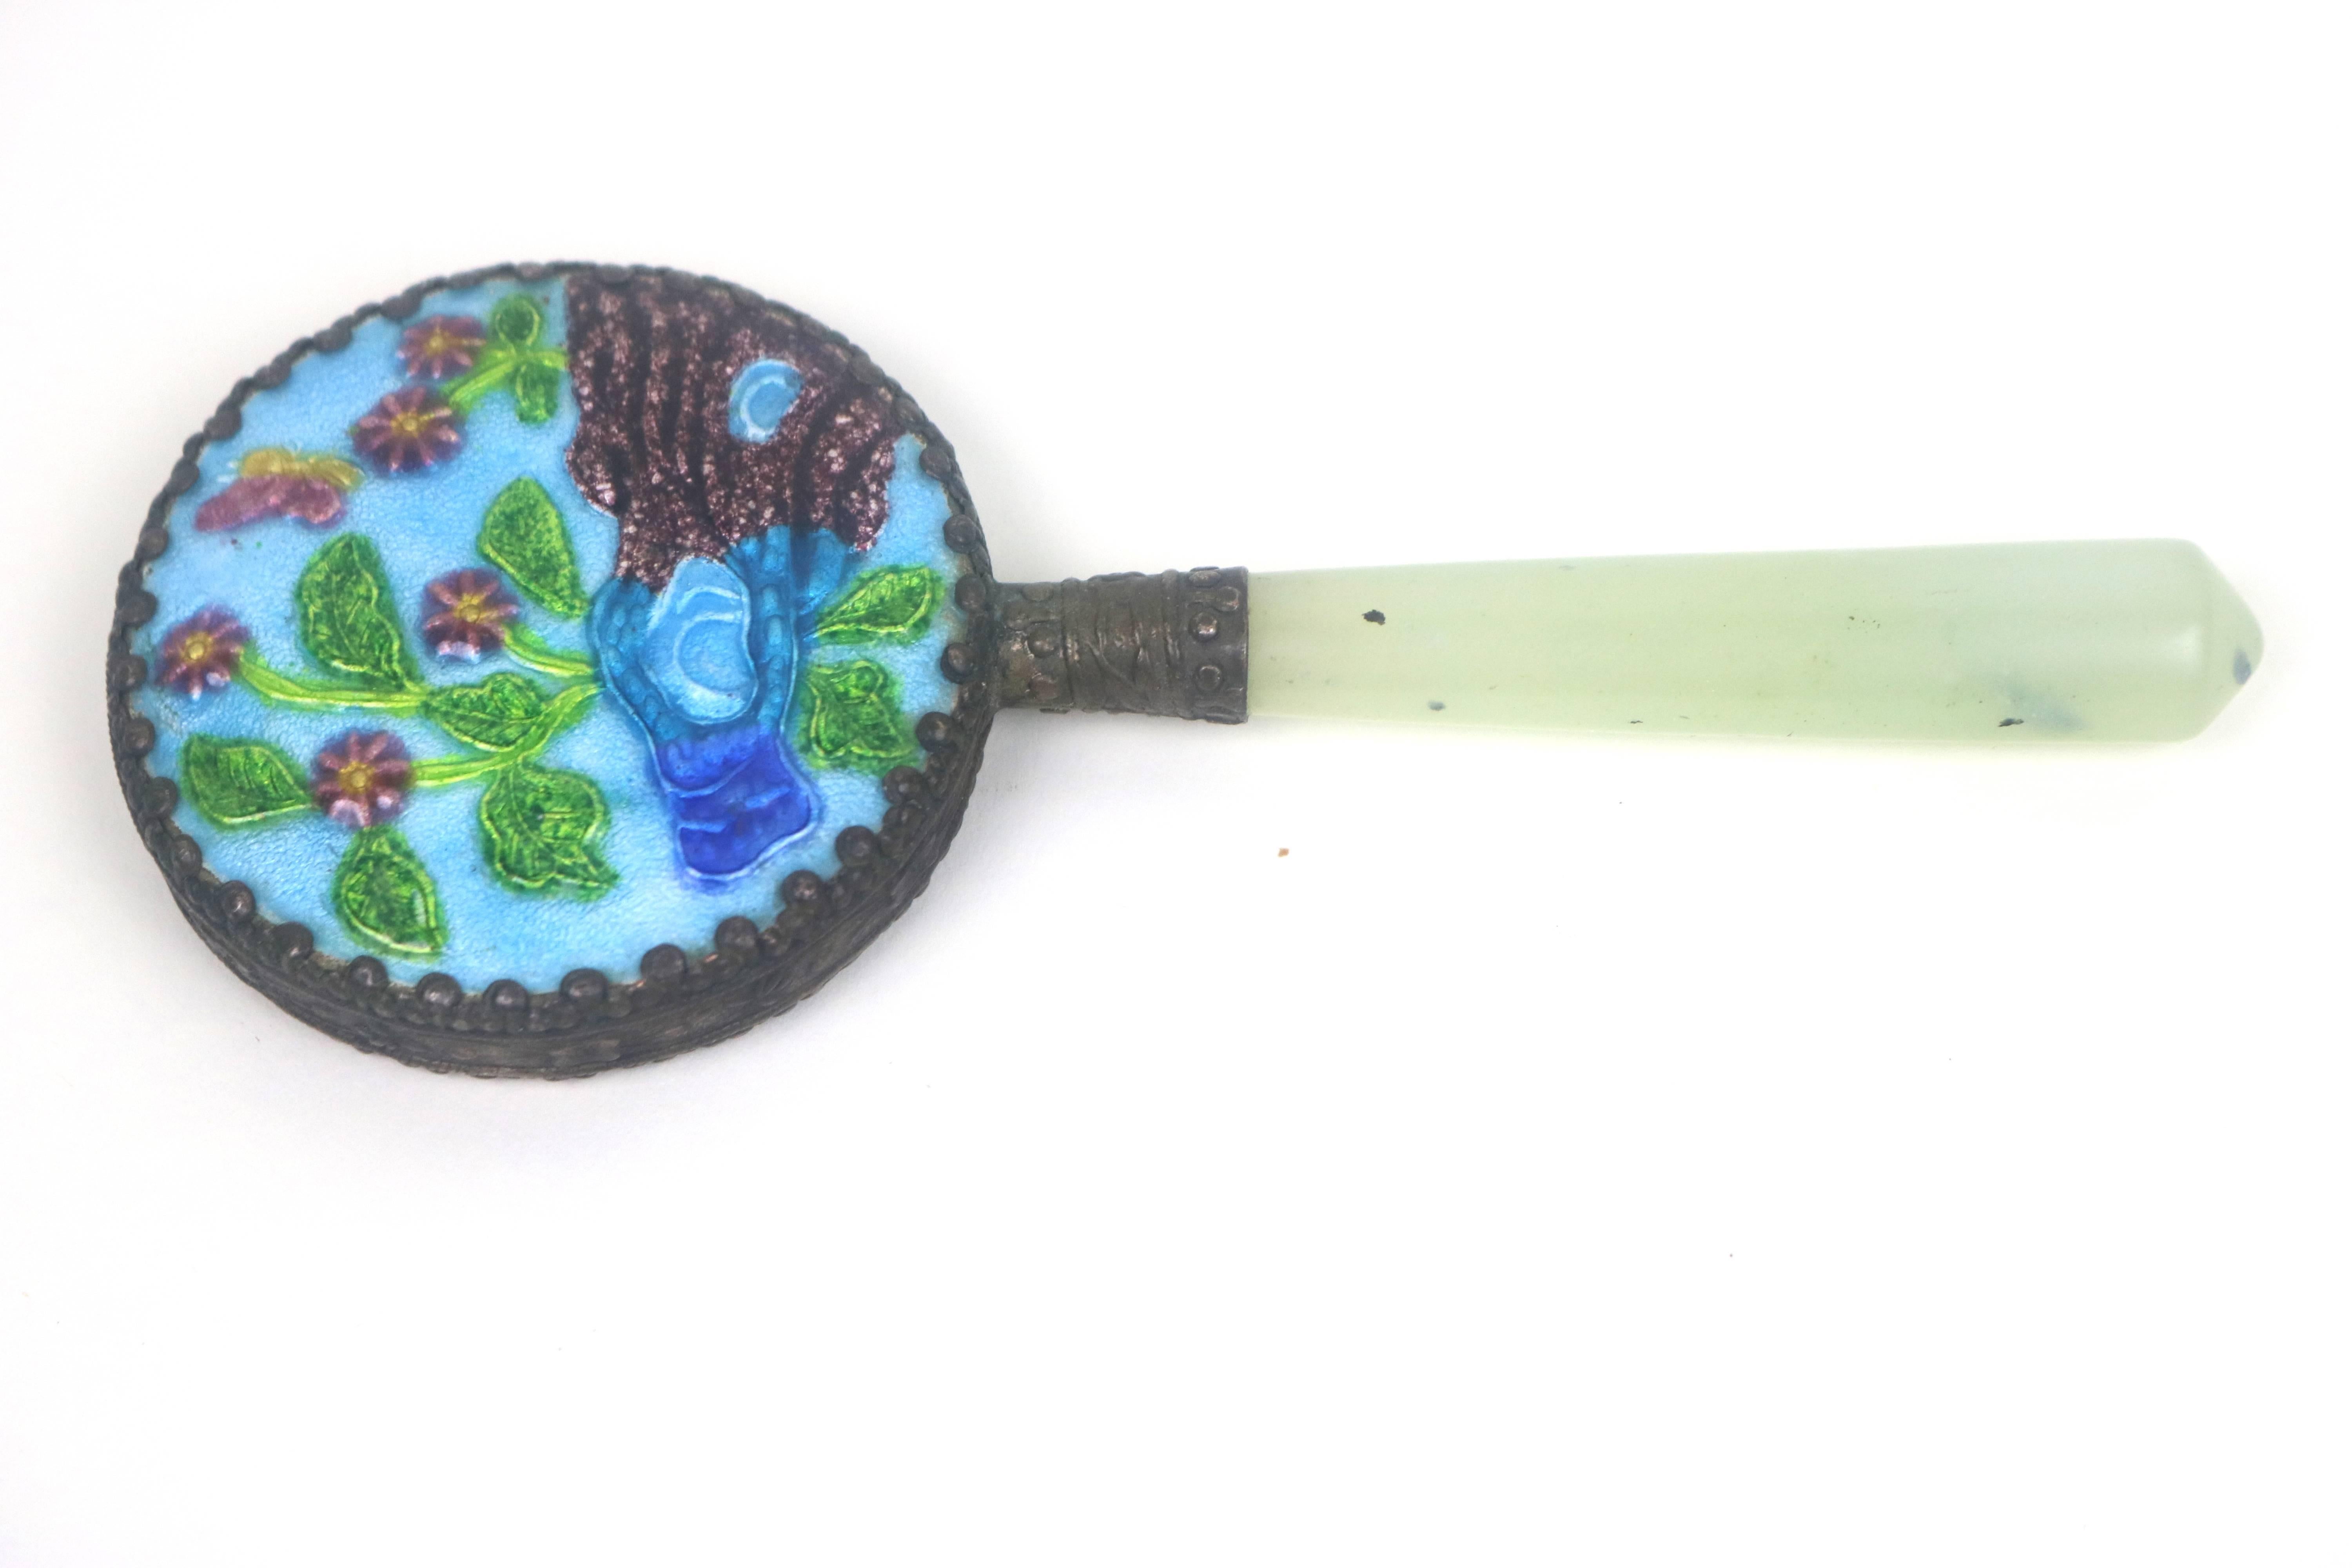 Makes A Marvelous Gift!
Small Lovely 1930's Chinese patinated brass filigree trimmed mirror  and handle with traditional Chinese design of enamel decoration of red flowers,green leaves and blue ponds and land on a background of blue guilloche enamel